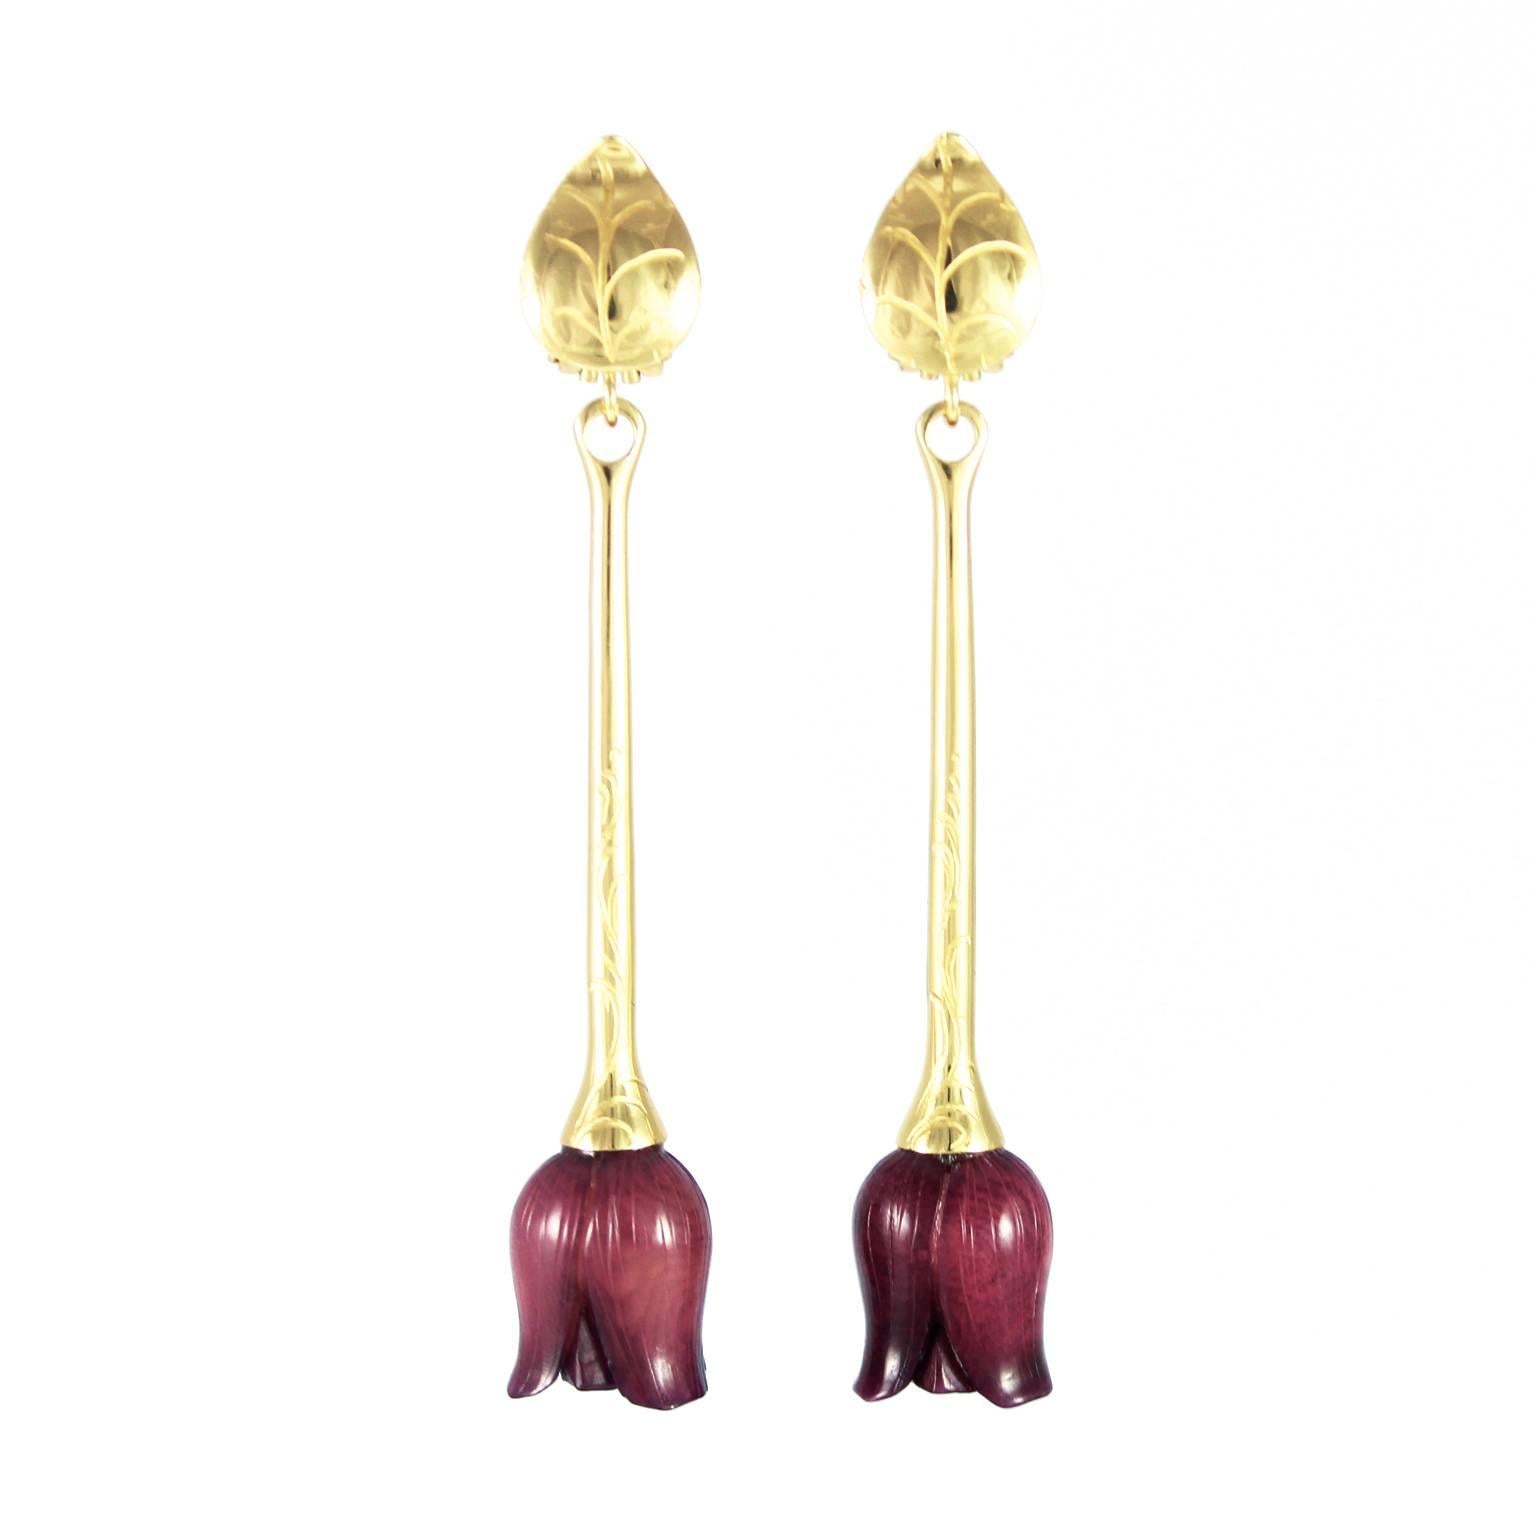 These unique earrings capture Nature’s beauty in gold and diamonds and Nuvory. Hand crafted by master Italian artists and goldsmiths, these graceful works of wearable art are an homage to Holland’s iconic flower. A delicately carved ruby red tulip